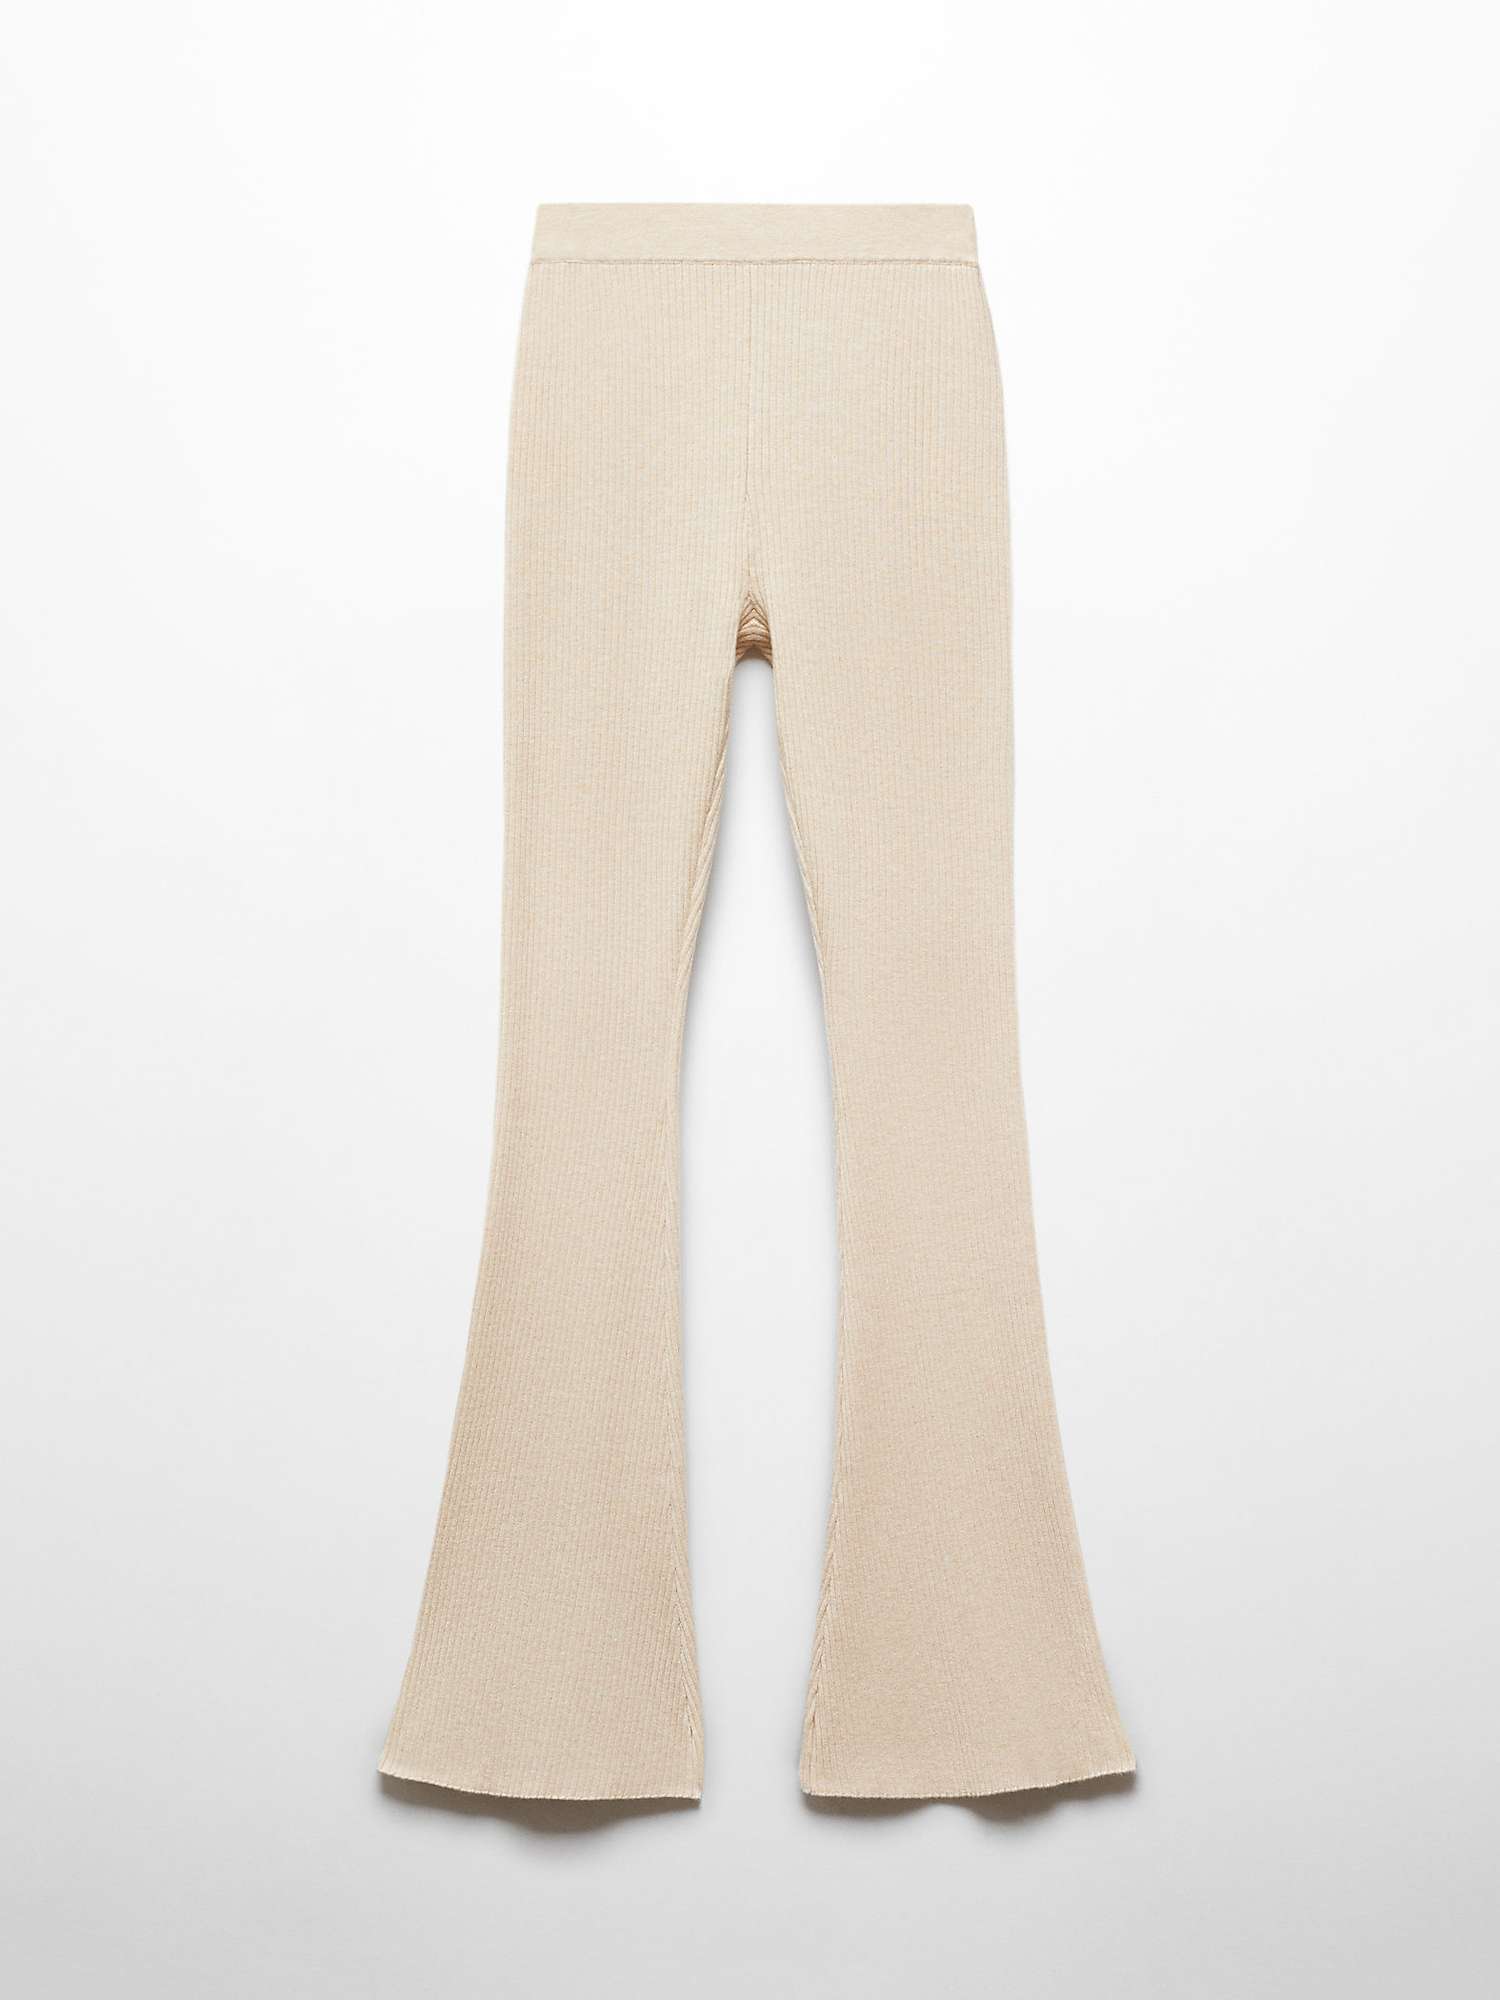 Buy Mango Flare Wide Leg Ribbed Trousers, Light Beige Online at johnlewis.com